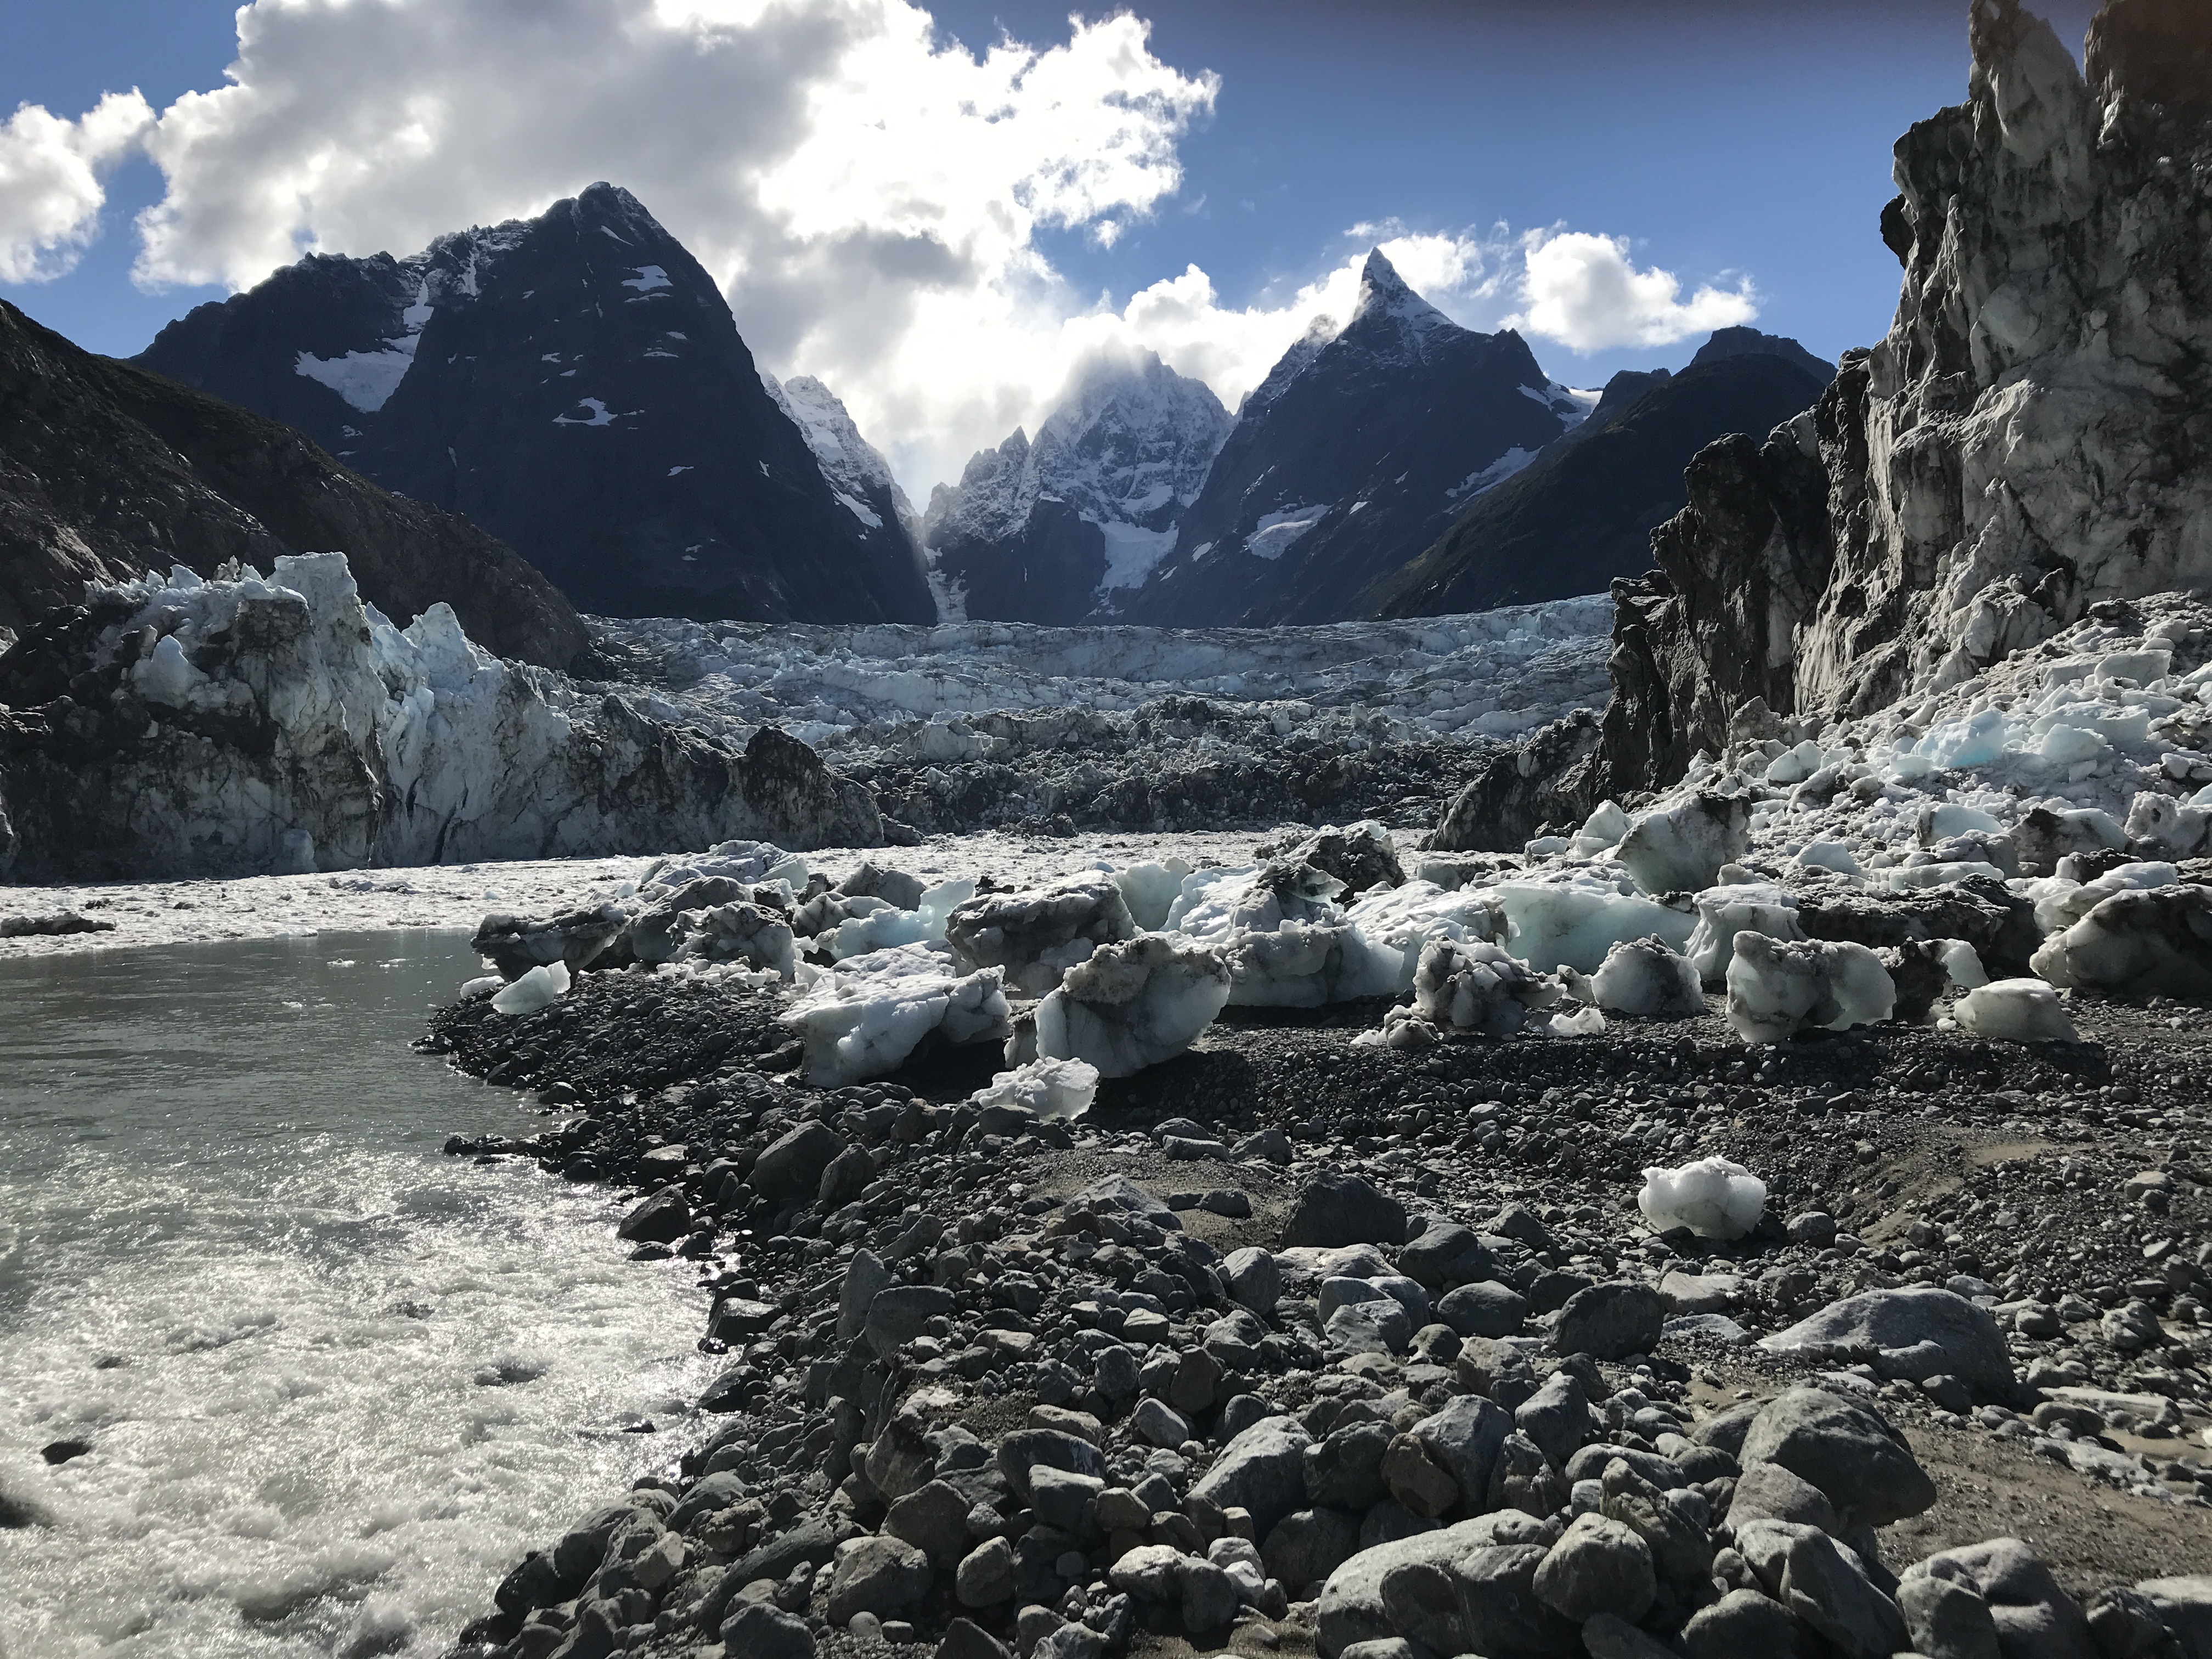 Earlier, higher, smaller: Climate change alters glacial lake outburst floods